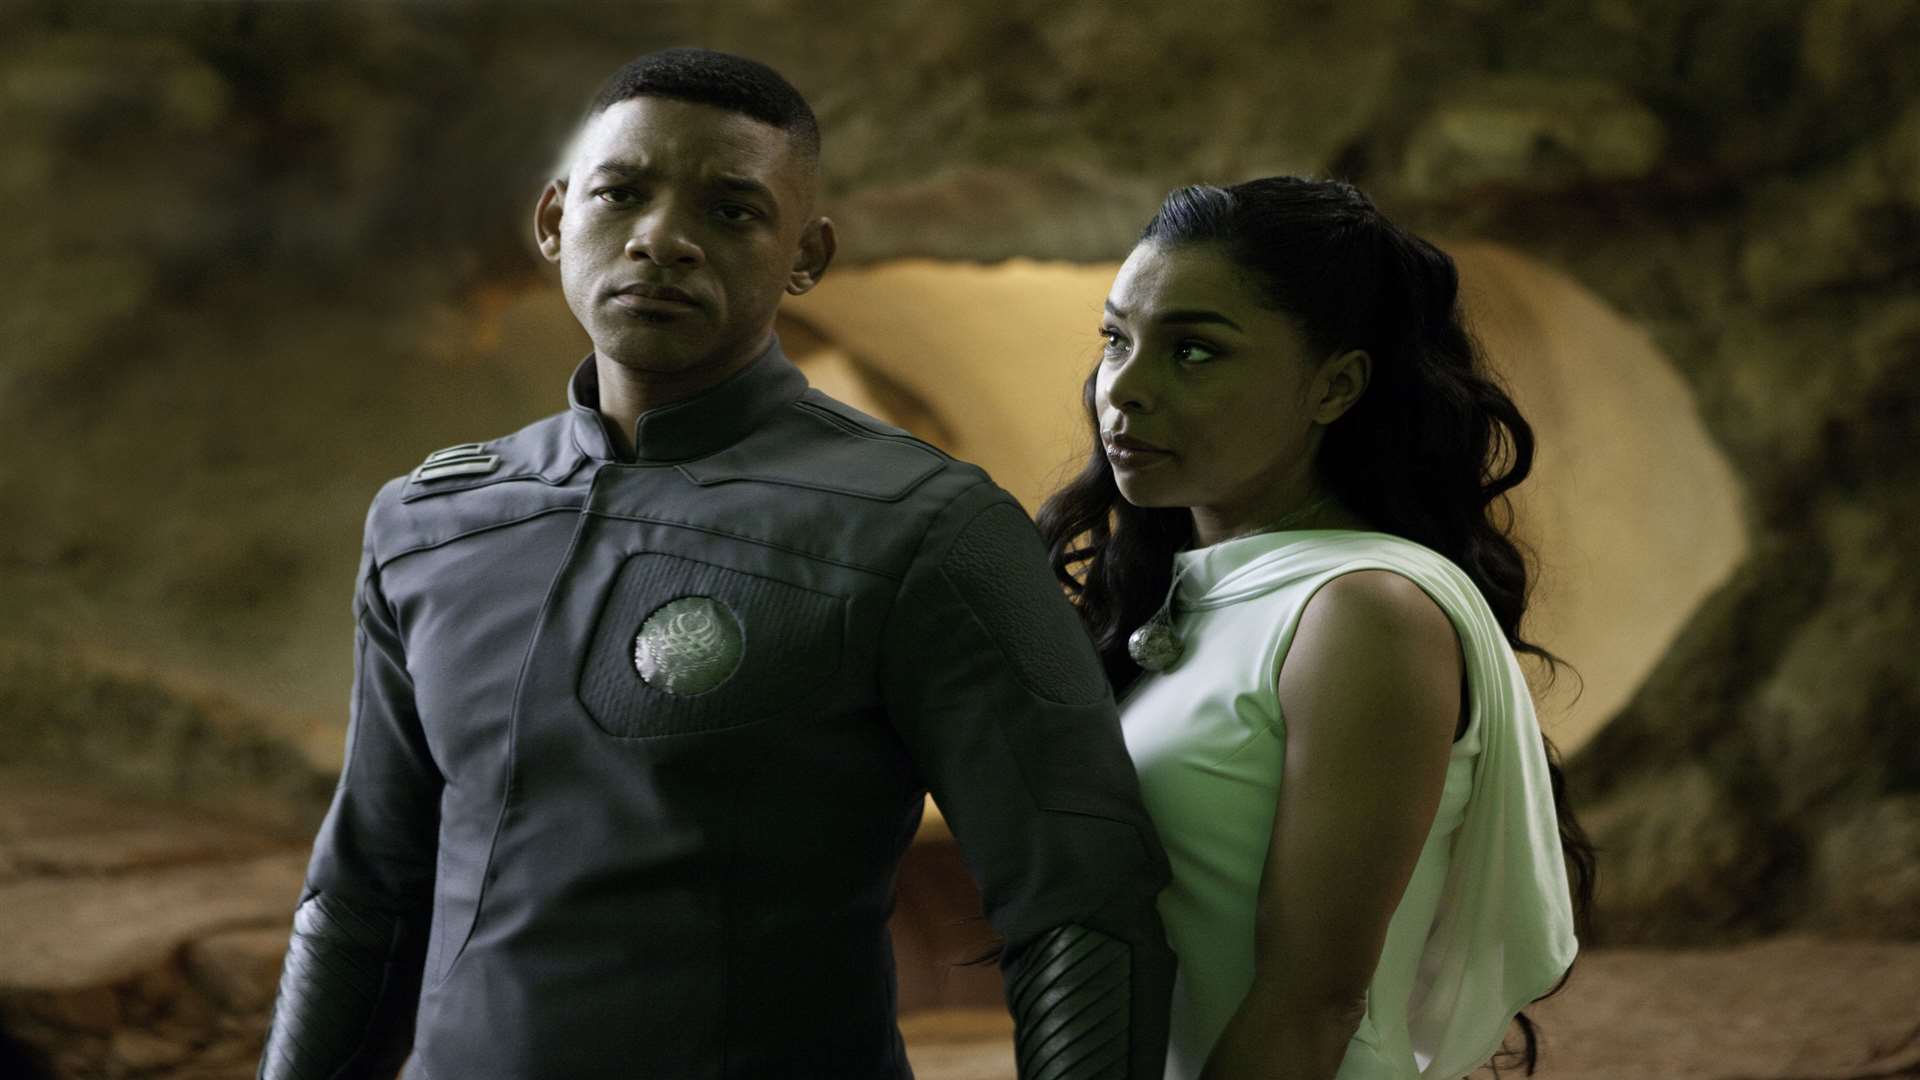 After Earth with Will Smith as Cypher Raige and Sophie Okonedo as Faia Raige. Picture: PA Photo/Sony UK.